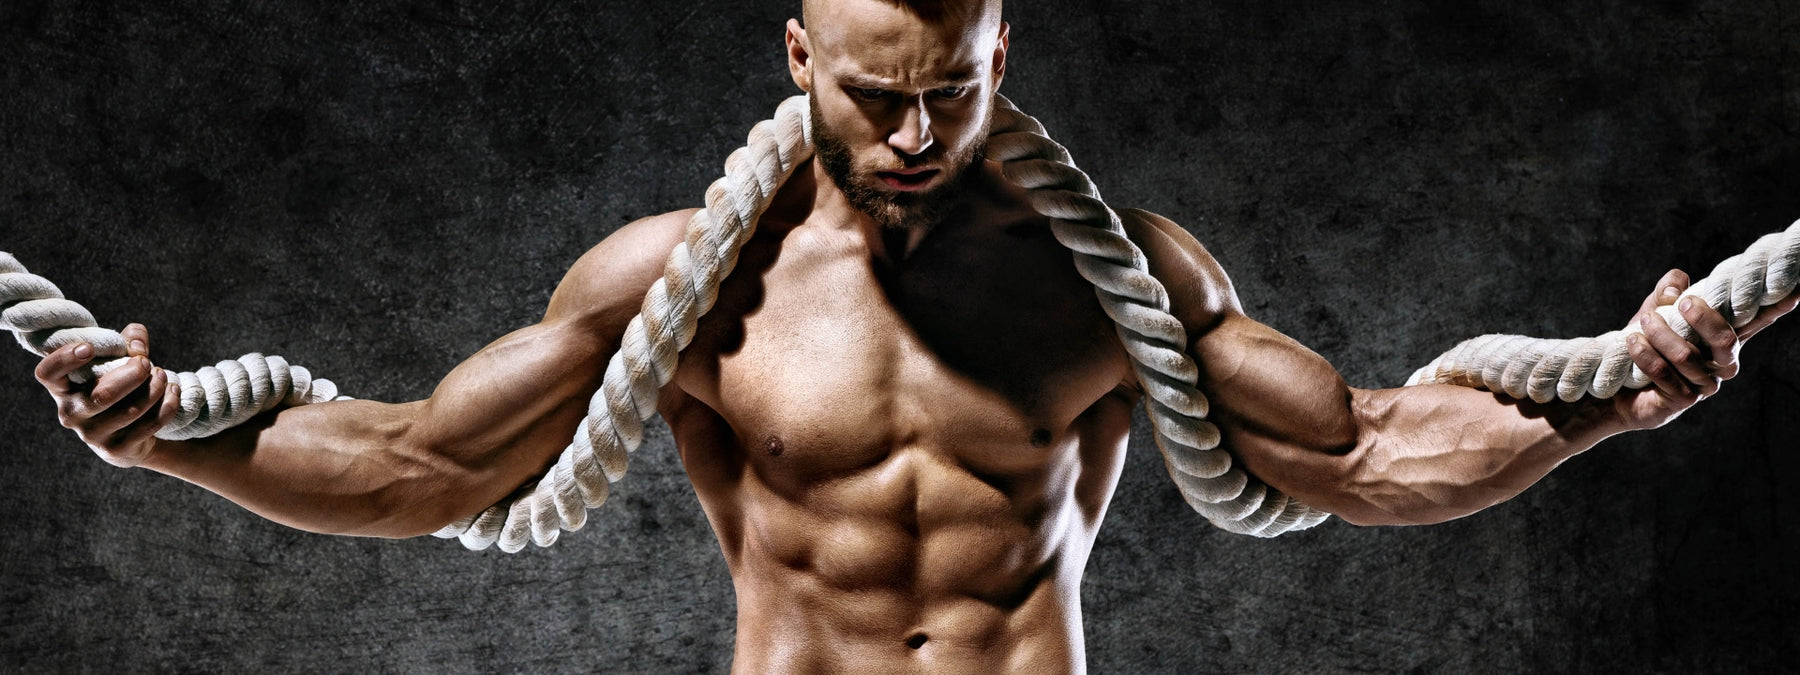 8 Potent Rope Exercises For More Muscle Mass